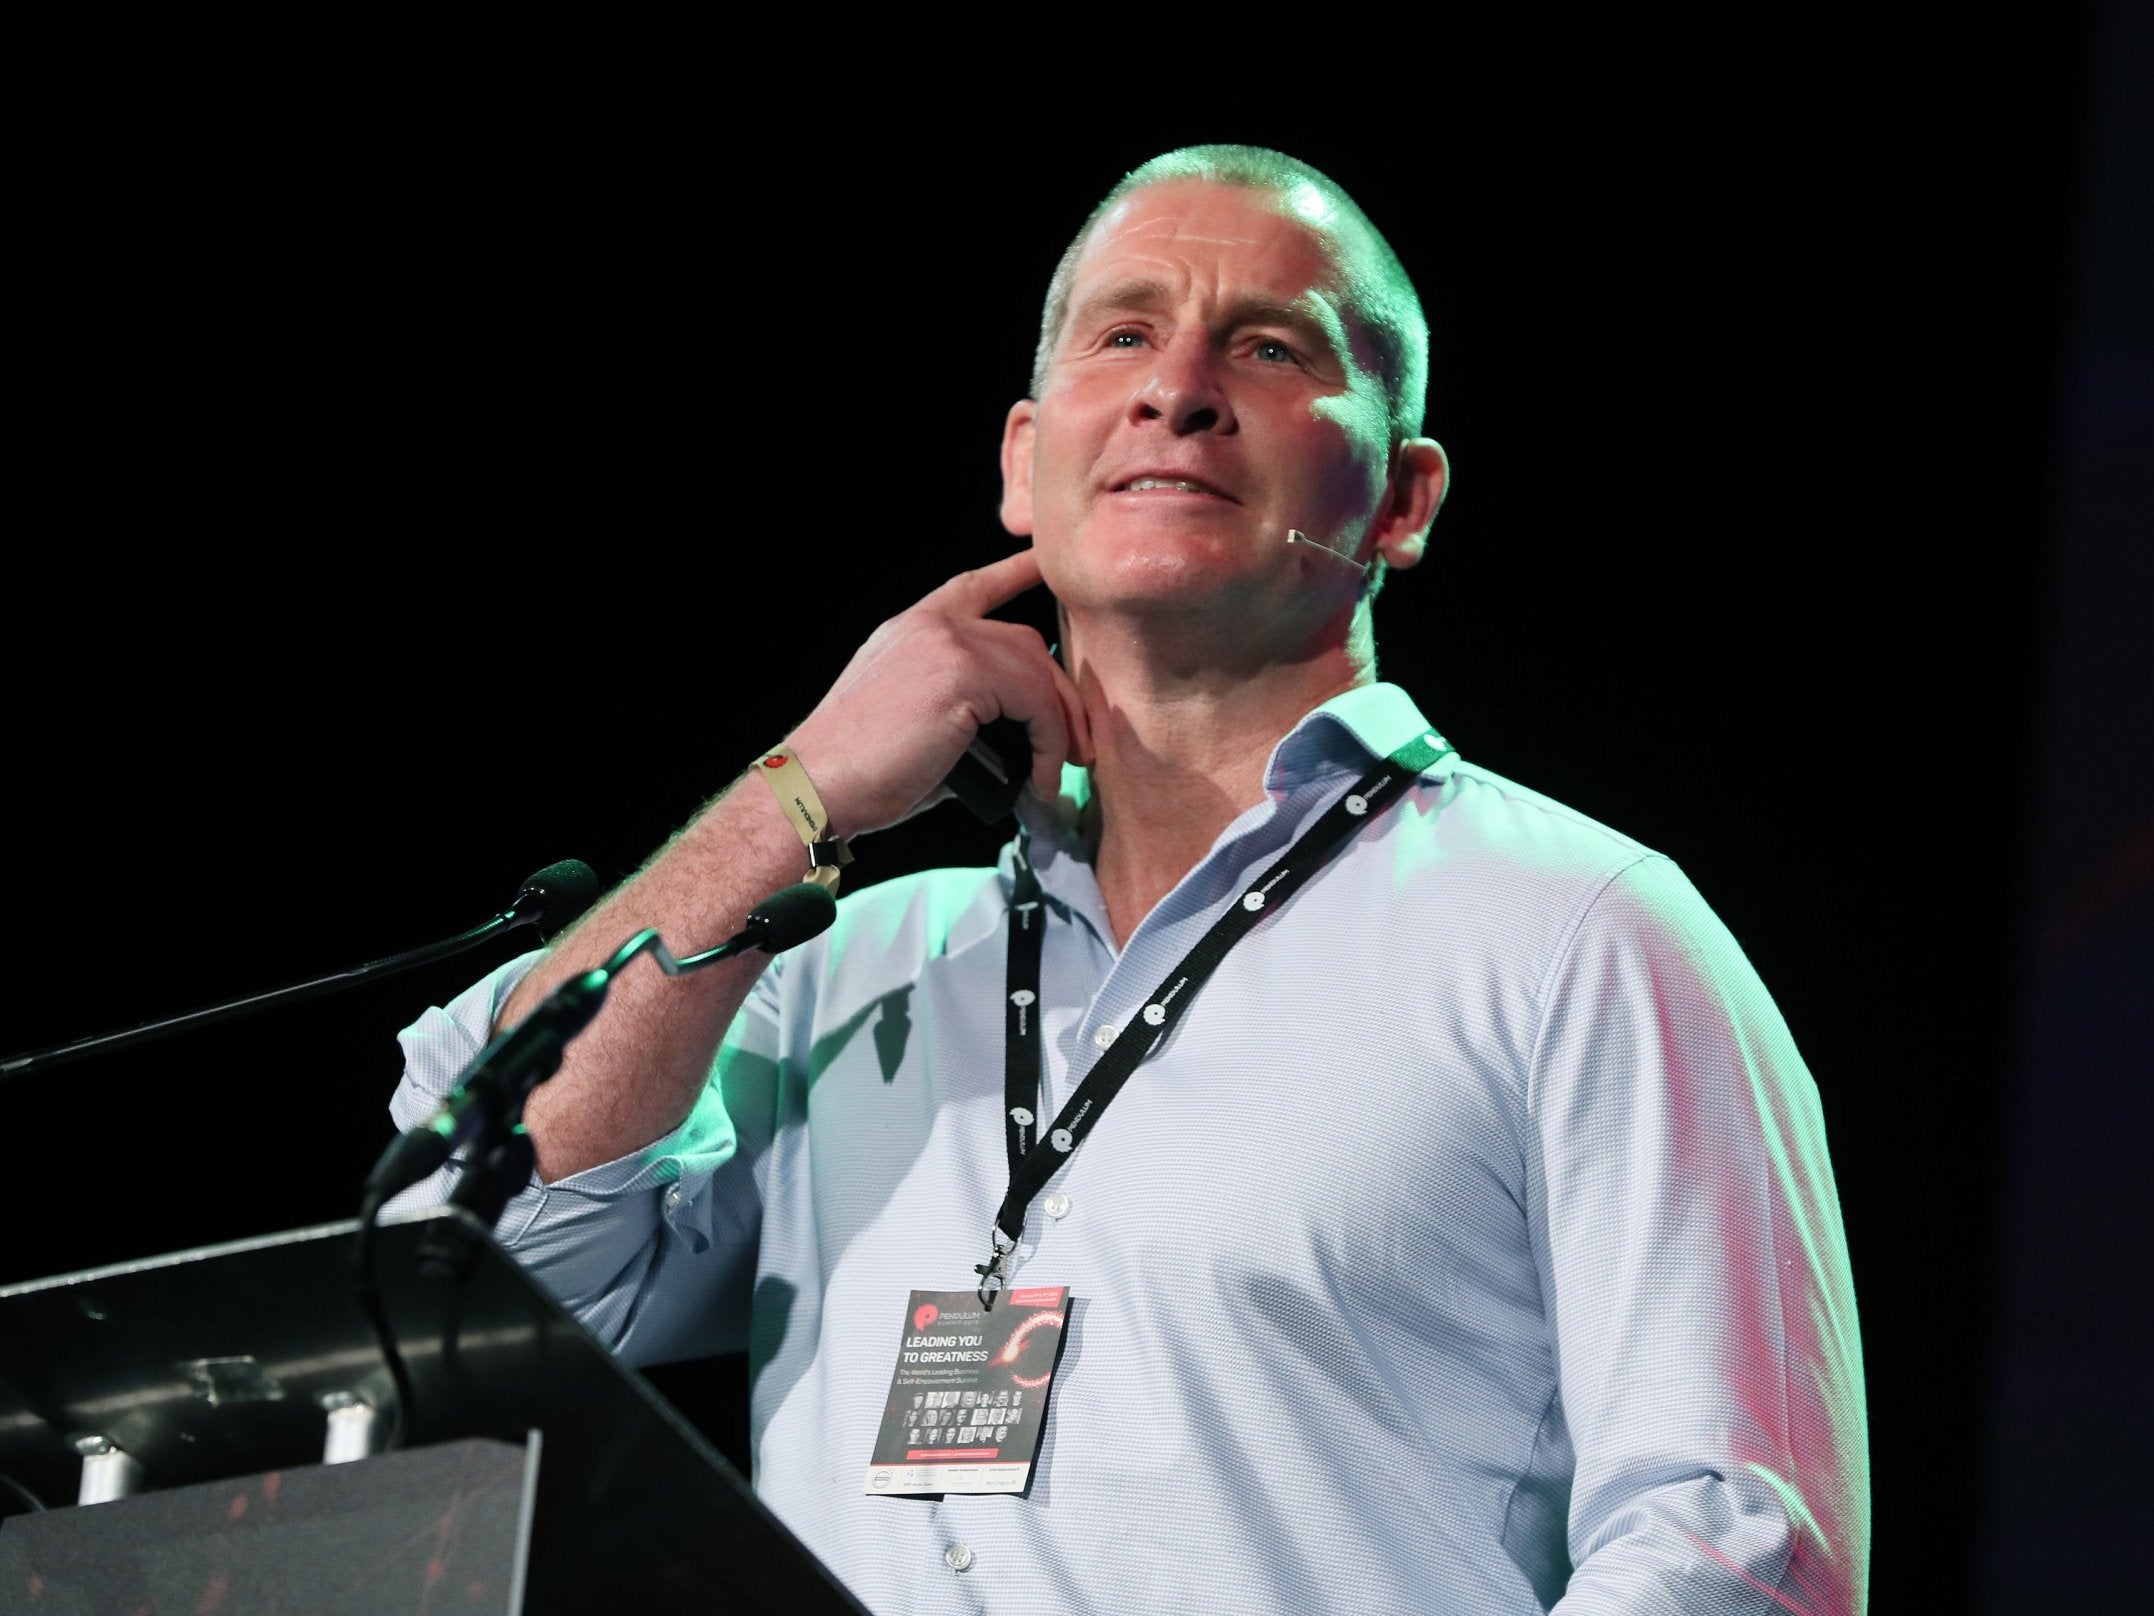 Stuart Lancaster has reflected on his time as England coach